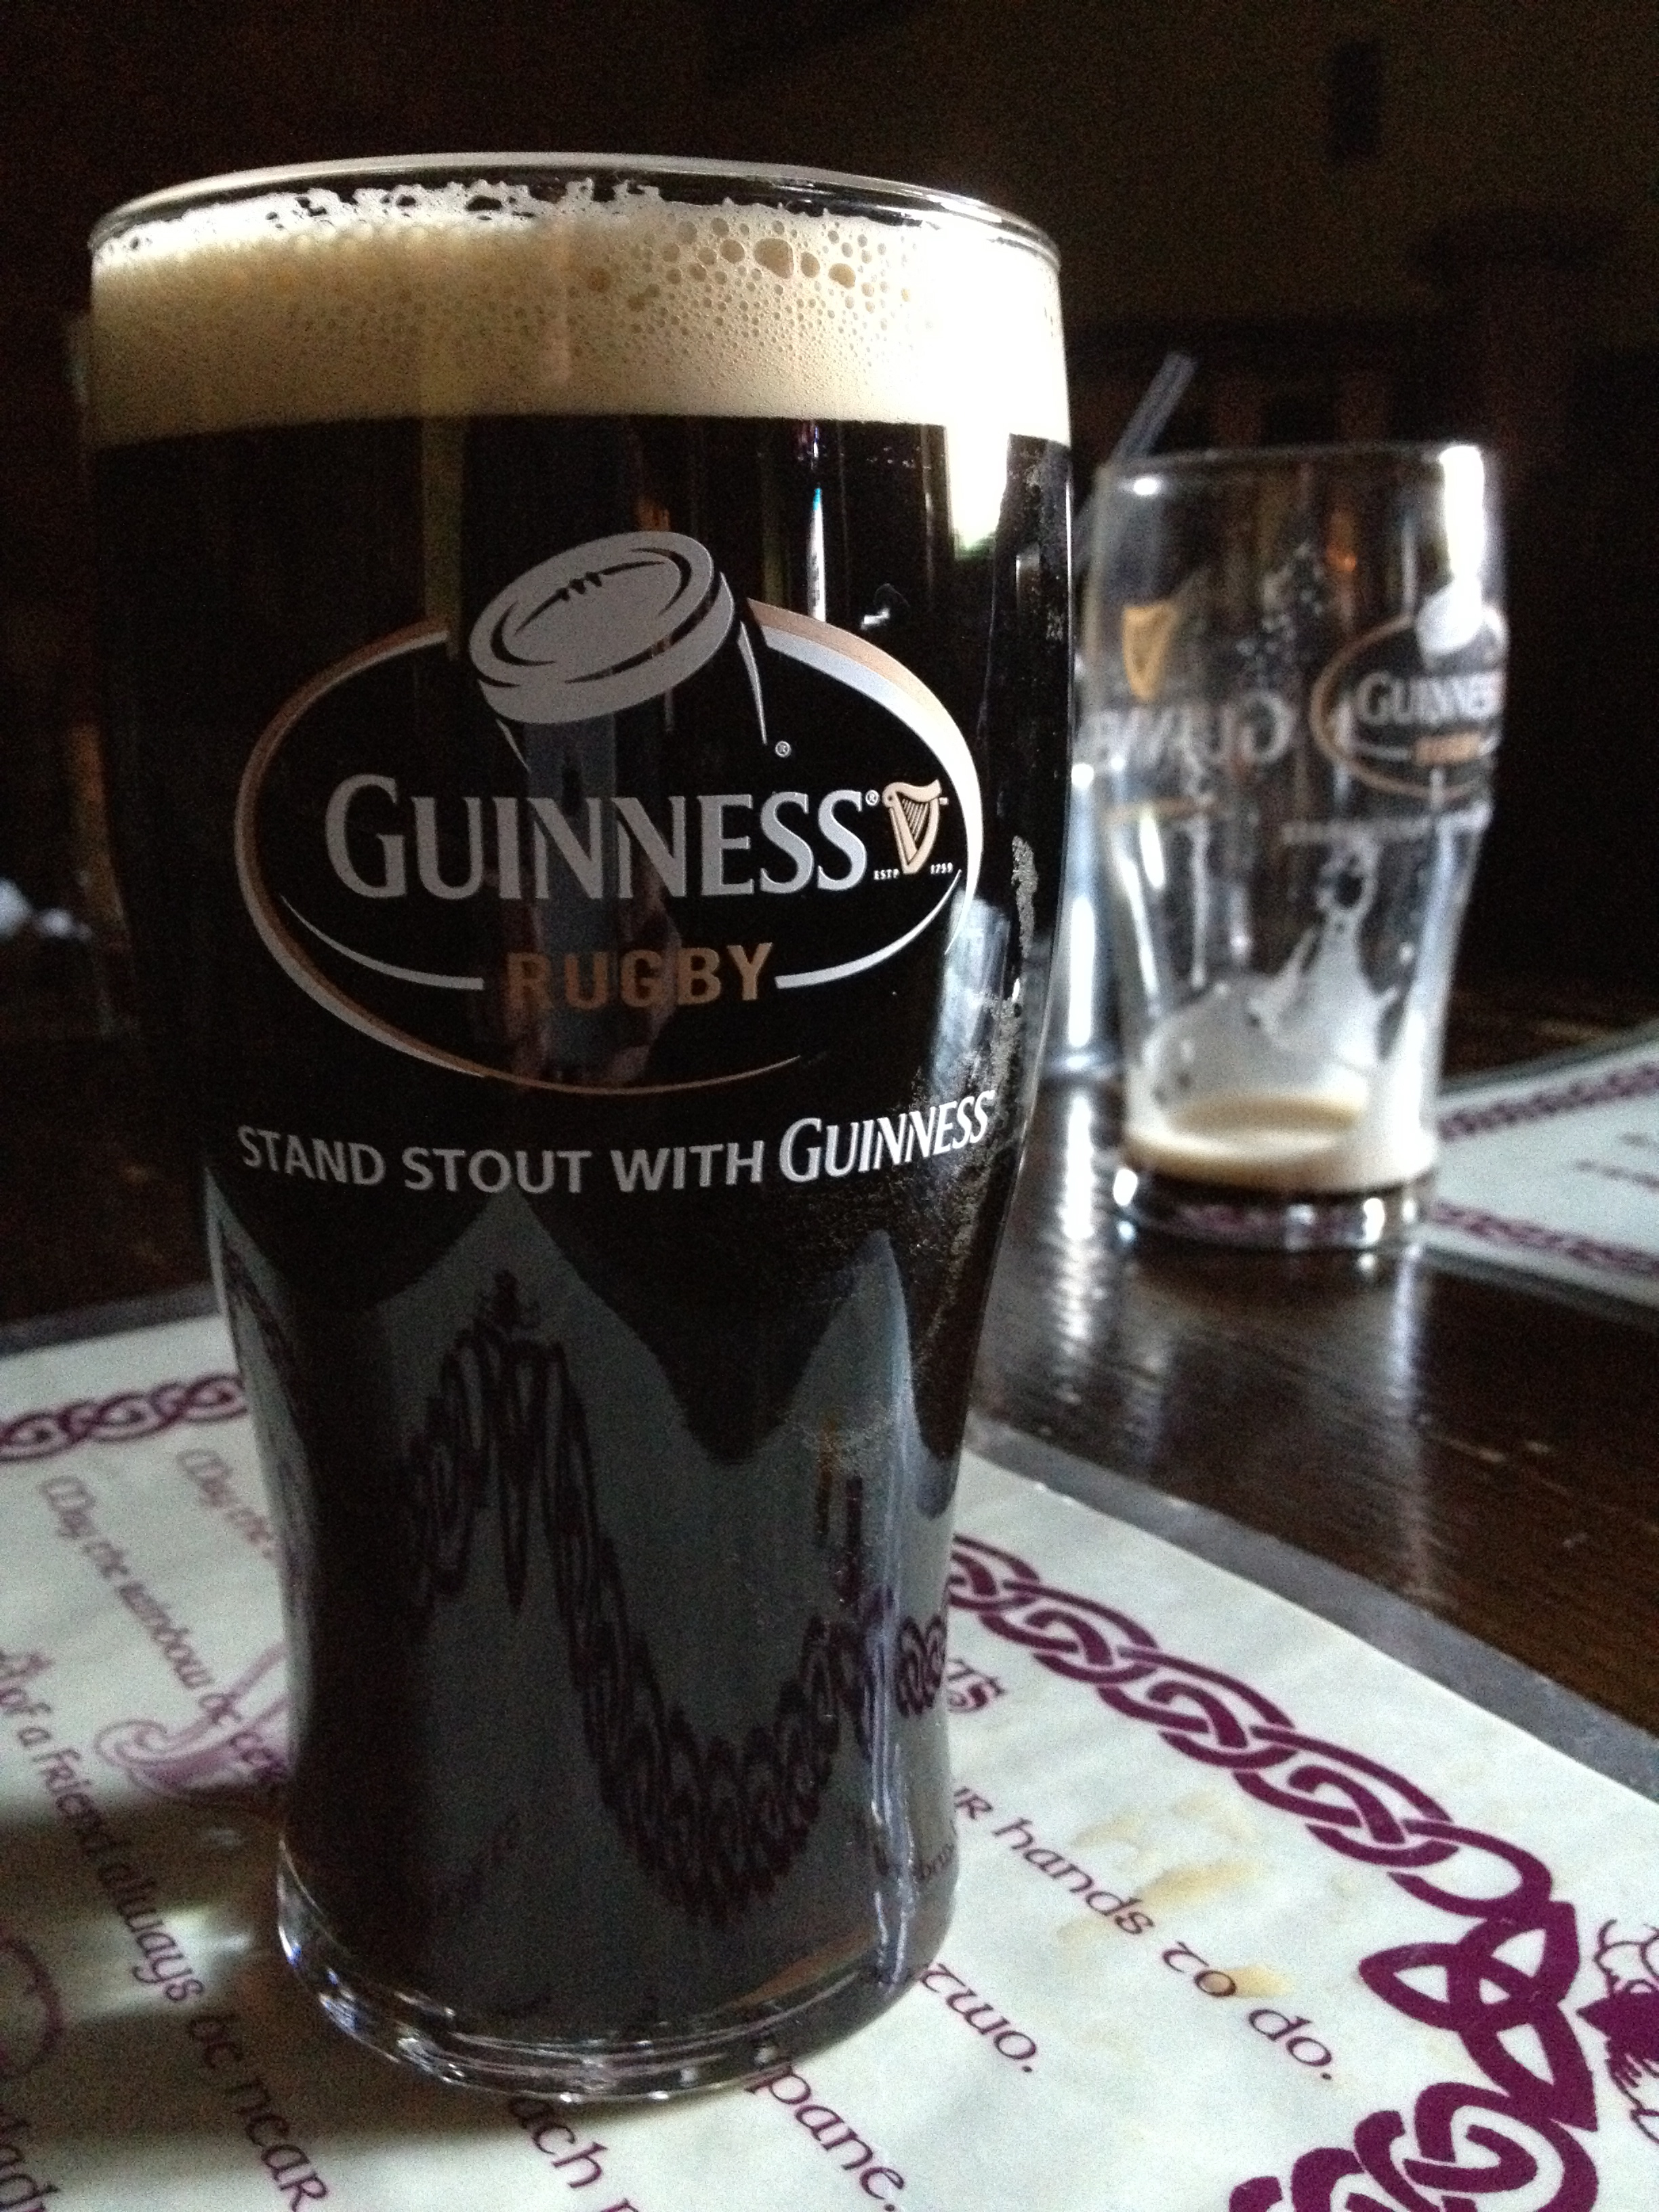 Stout and rugby